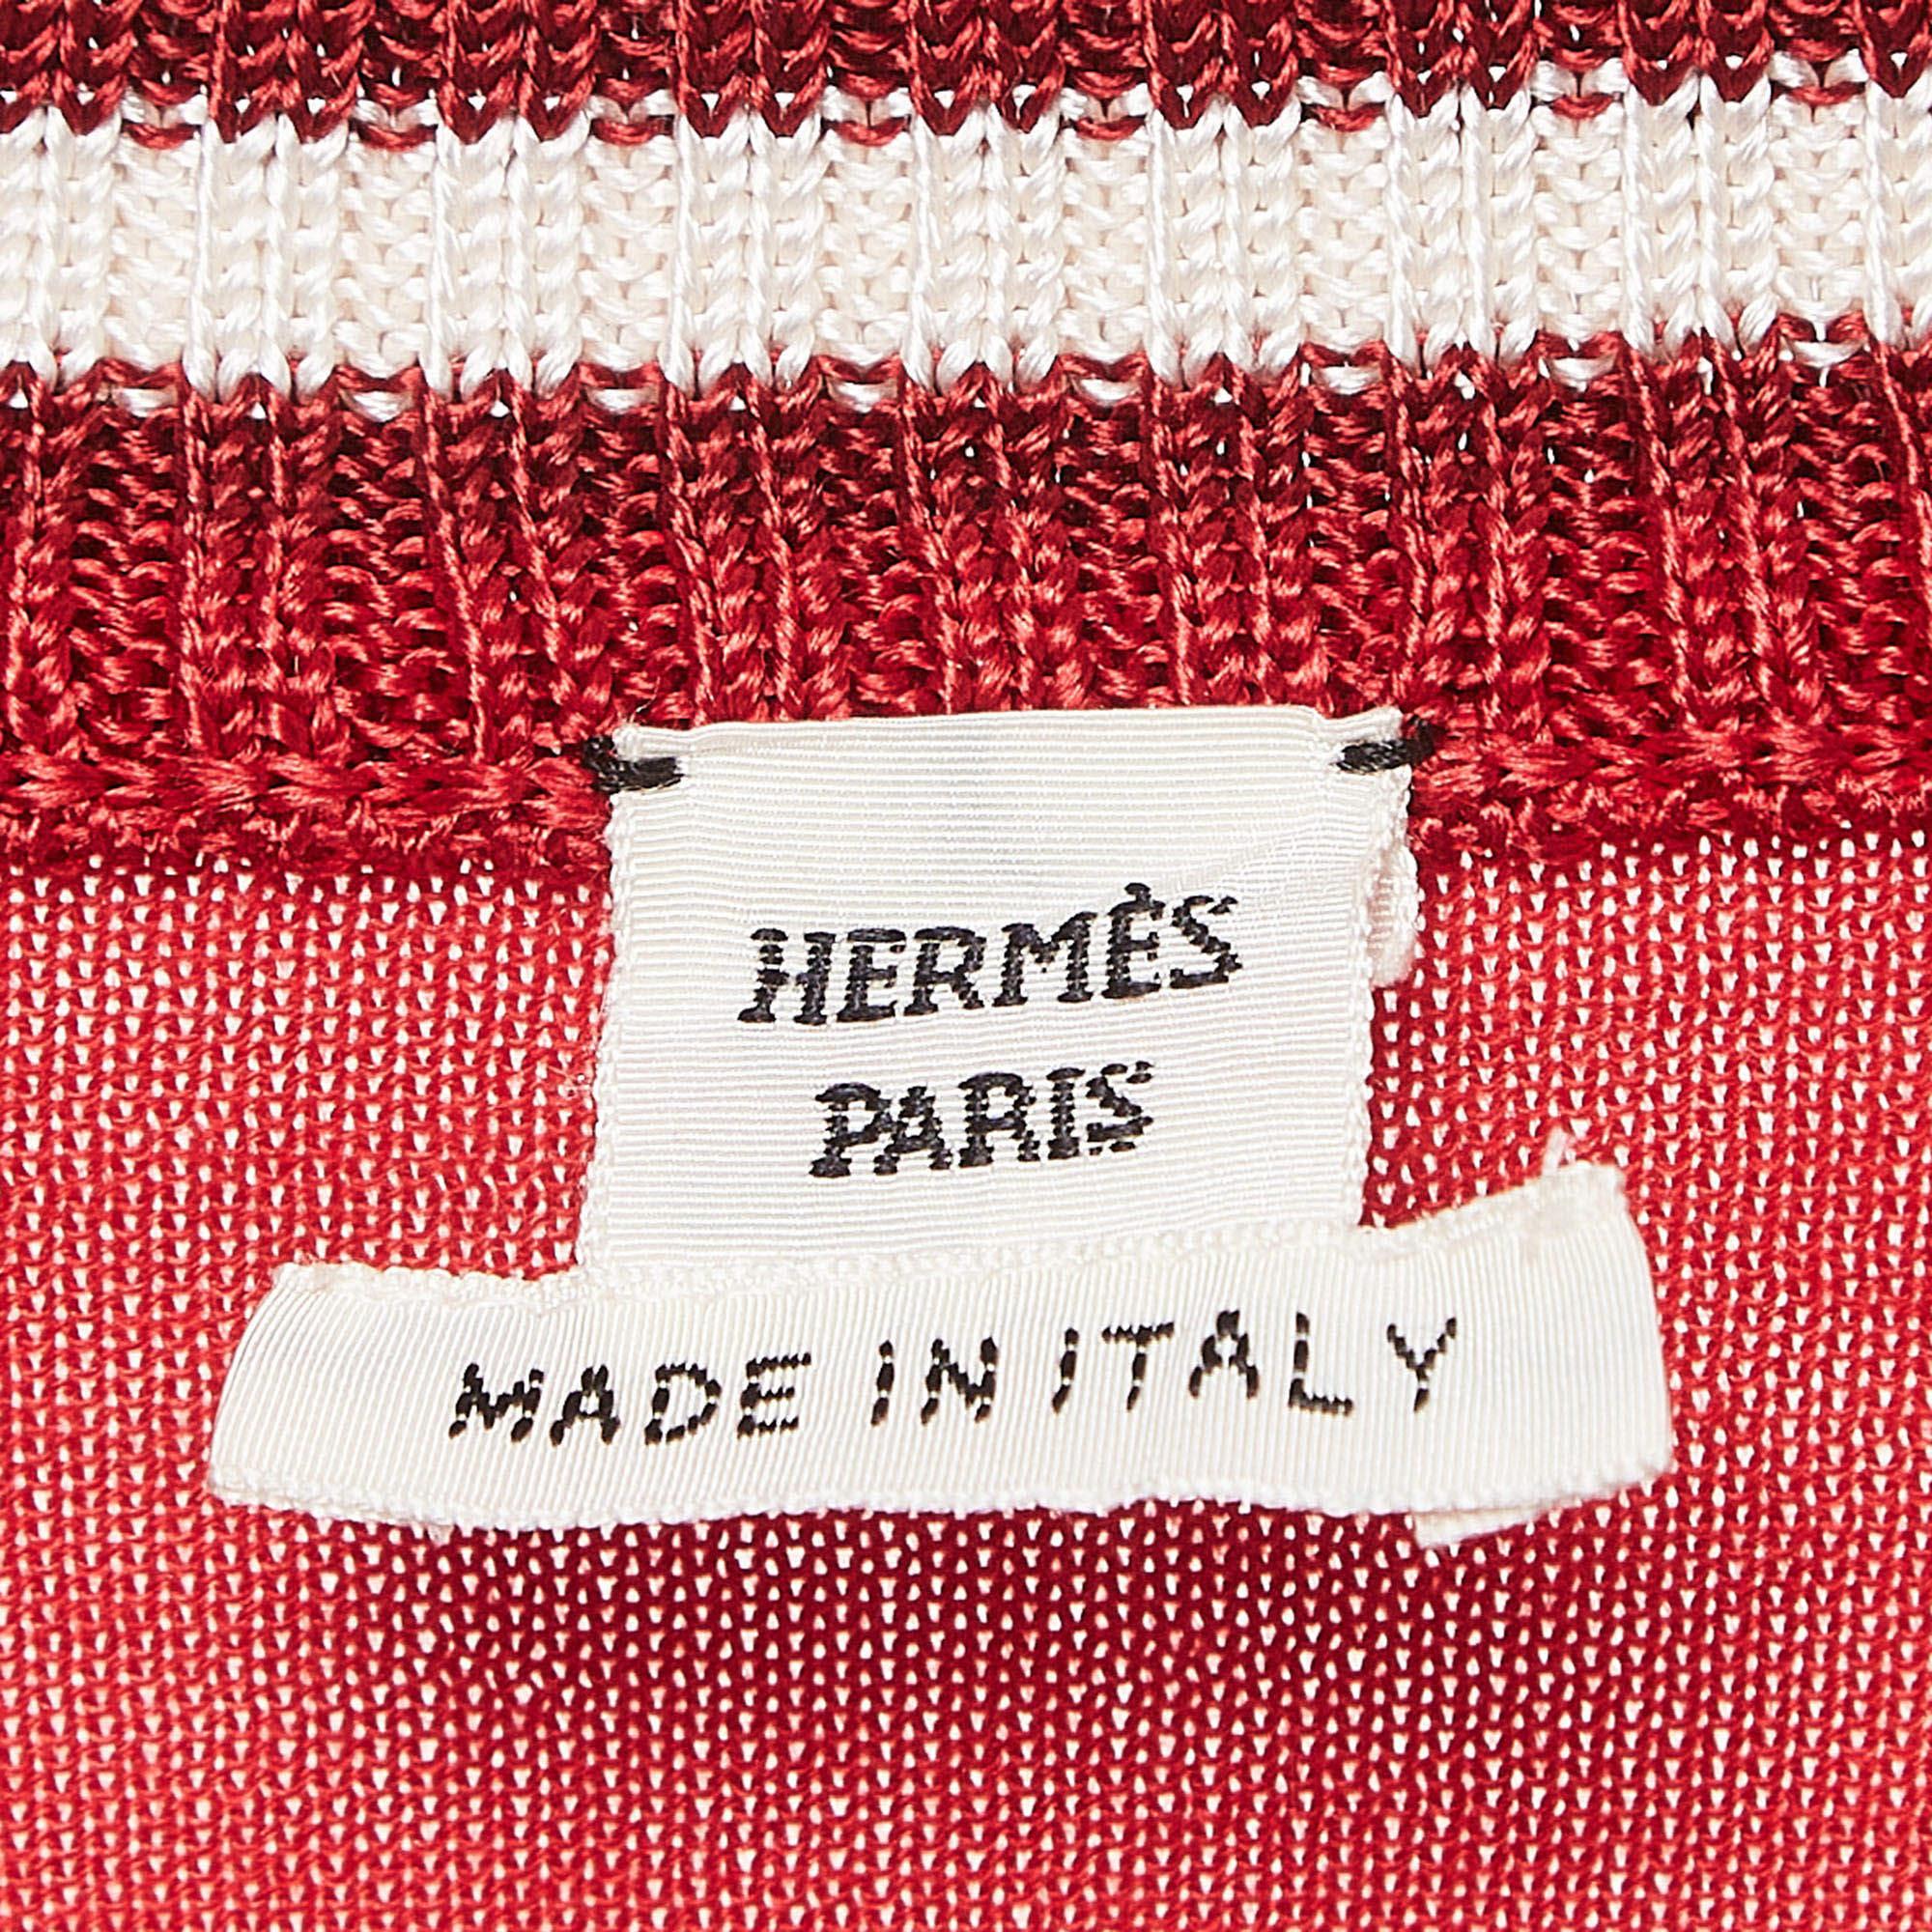  Hermès Red Textured Knit Chaines d' Ancre Zipper Top S For Sale 1